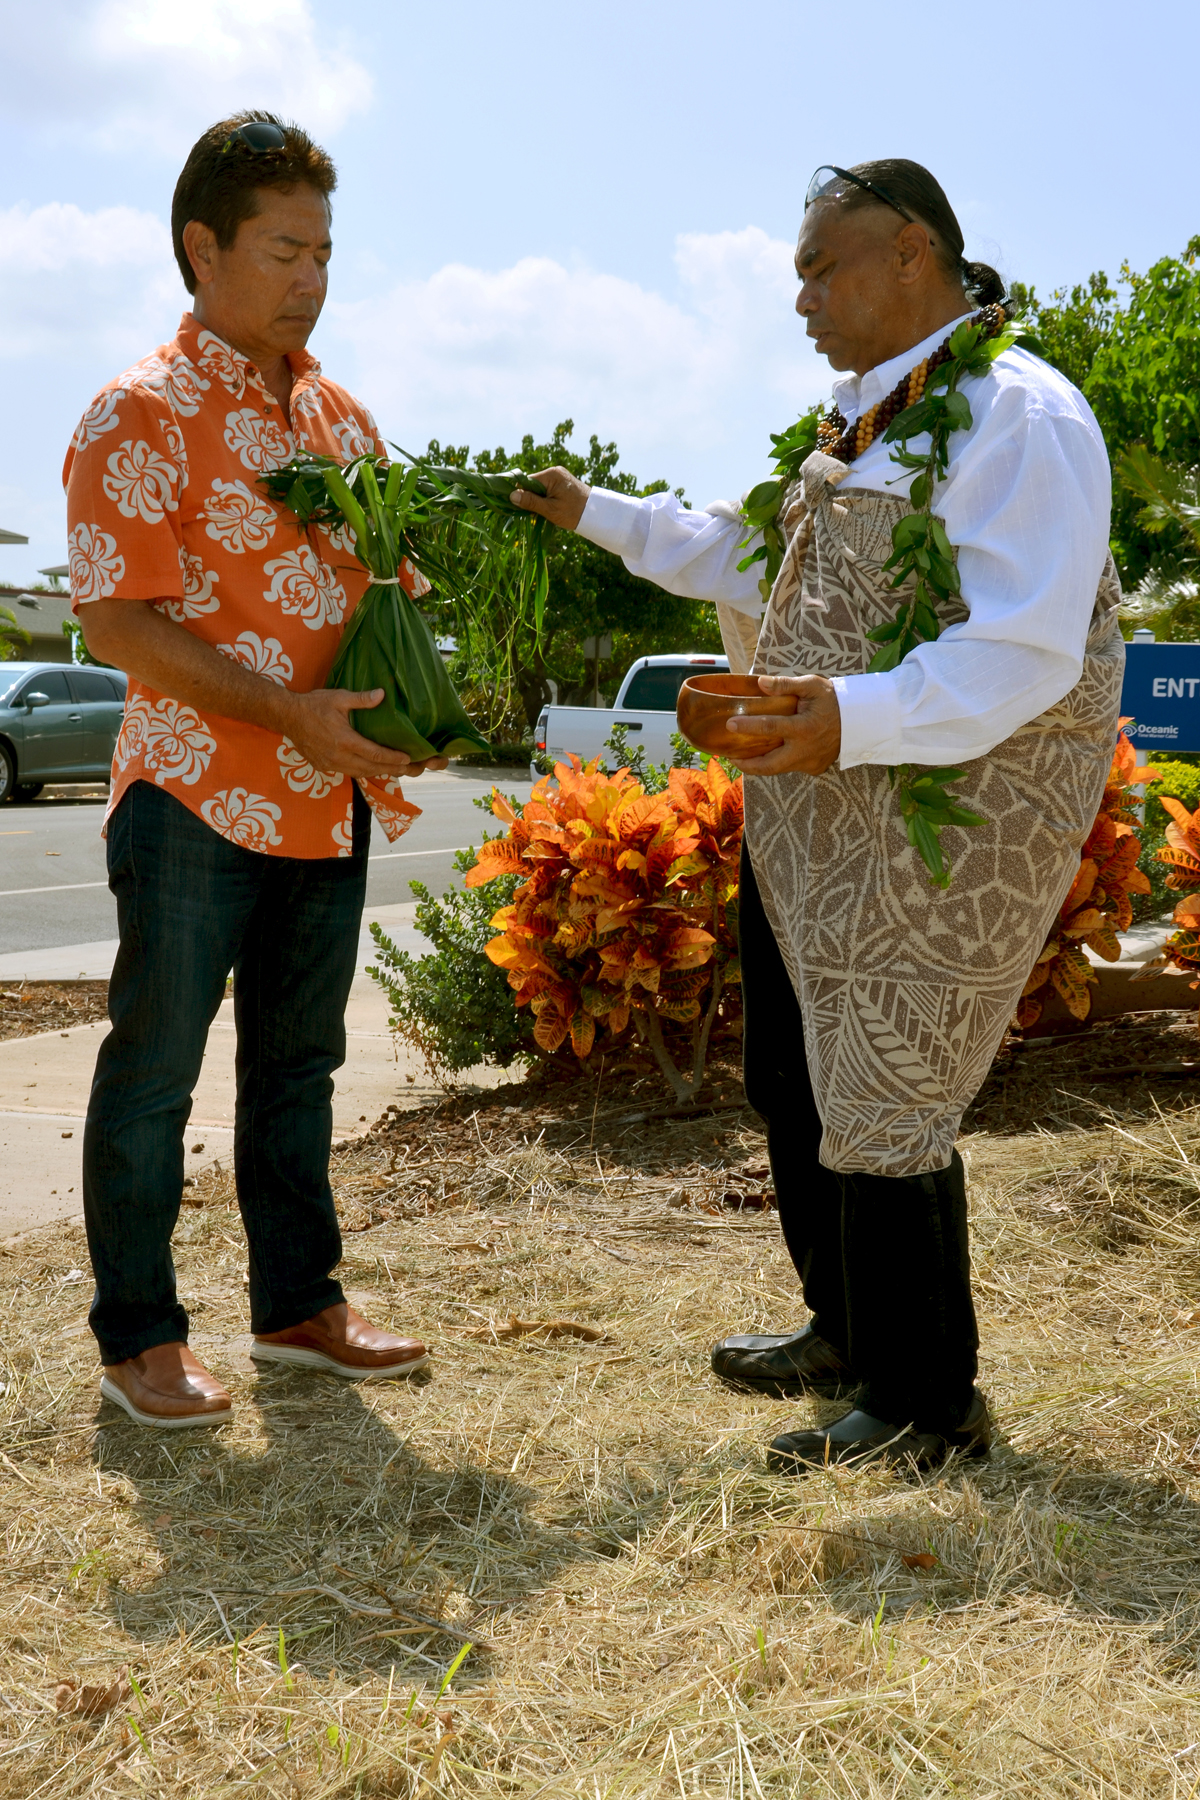 Mark Teruya, chairman and CEO of Armstrong Produce, holds a ho`okupu during the groundbreaking ceremony for construction of Kula Produce’s new facility in Maui Lani. Kahu Marcelo Bustillos officiated the private groundbreaking event on October 9. Photo courtesy of Maui Lani Village Center.